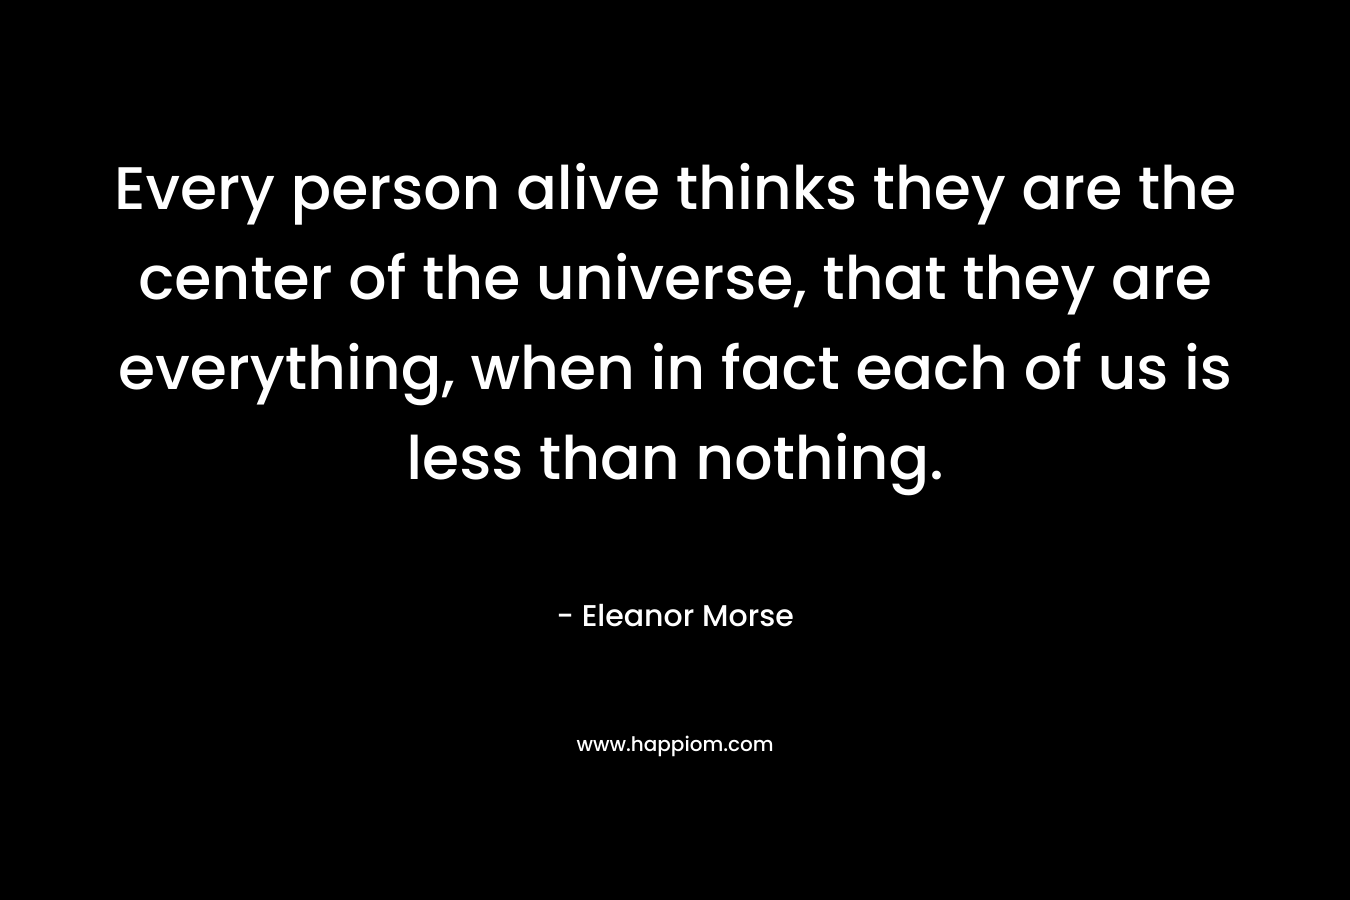 Every person alive thinks they are the center of the universe, that they are everything, when in fact each of us is less than nothing. – Eleanor Morse